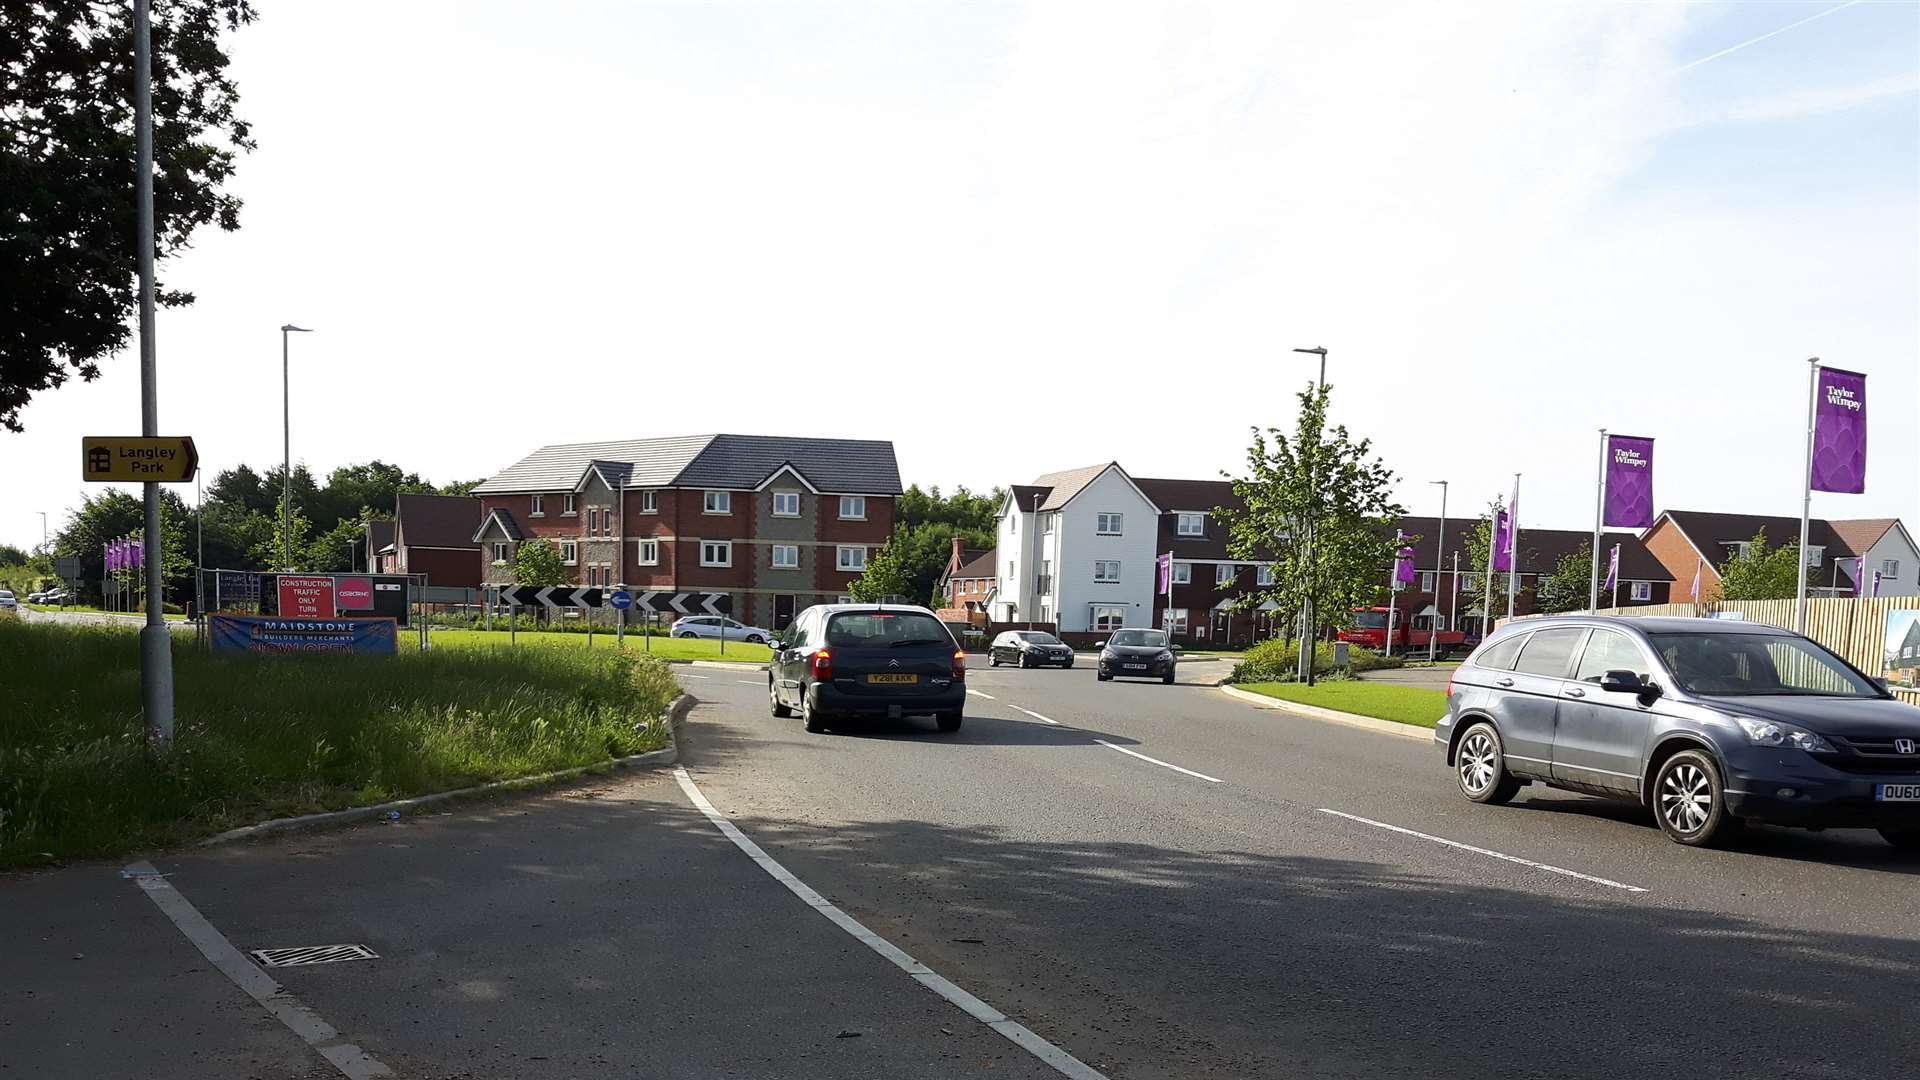 There are concerns over the effect on traffic on the Sutton Road